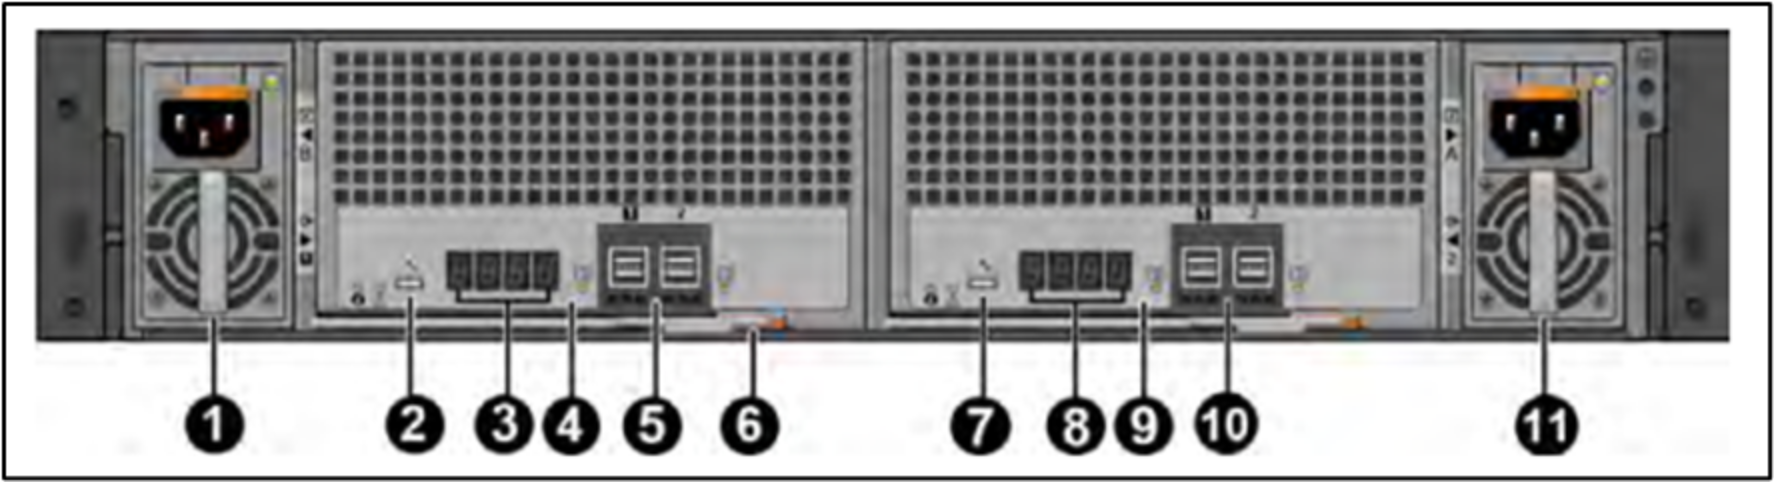 The image depicts the rear enclosure view of a expansion shelf (ES120).